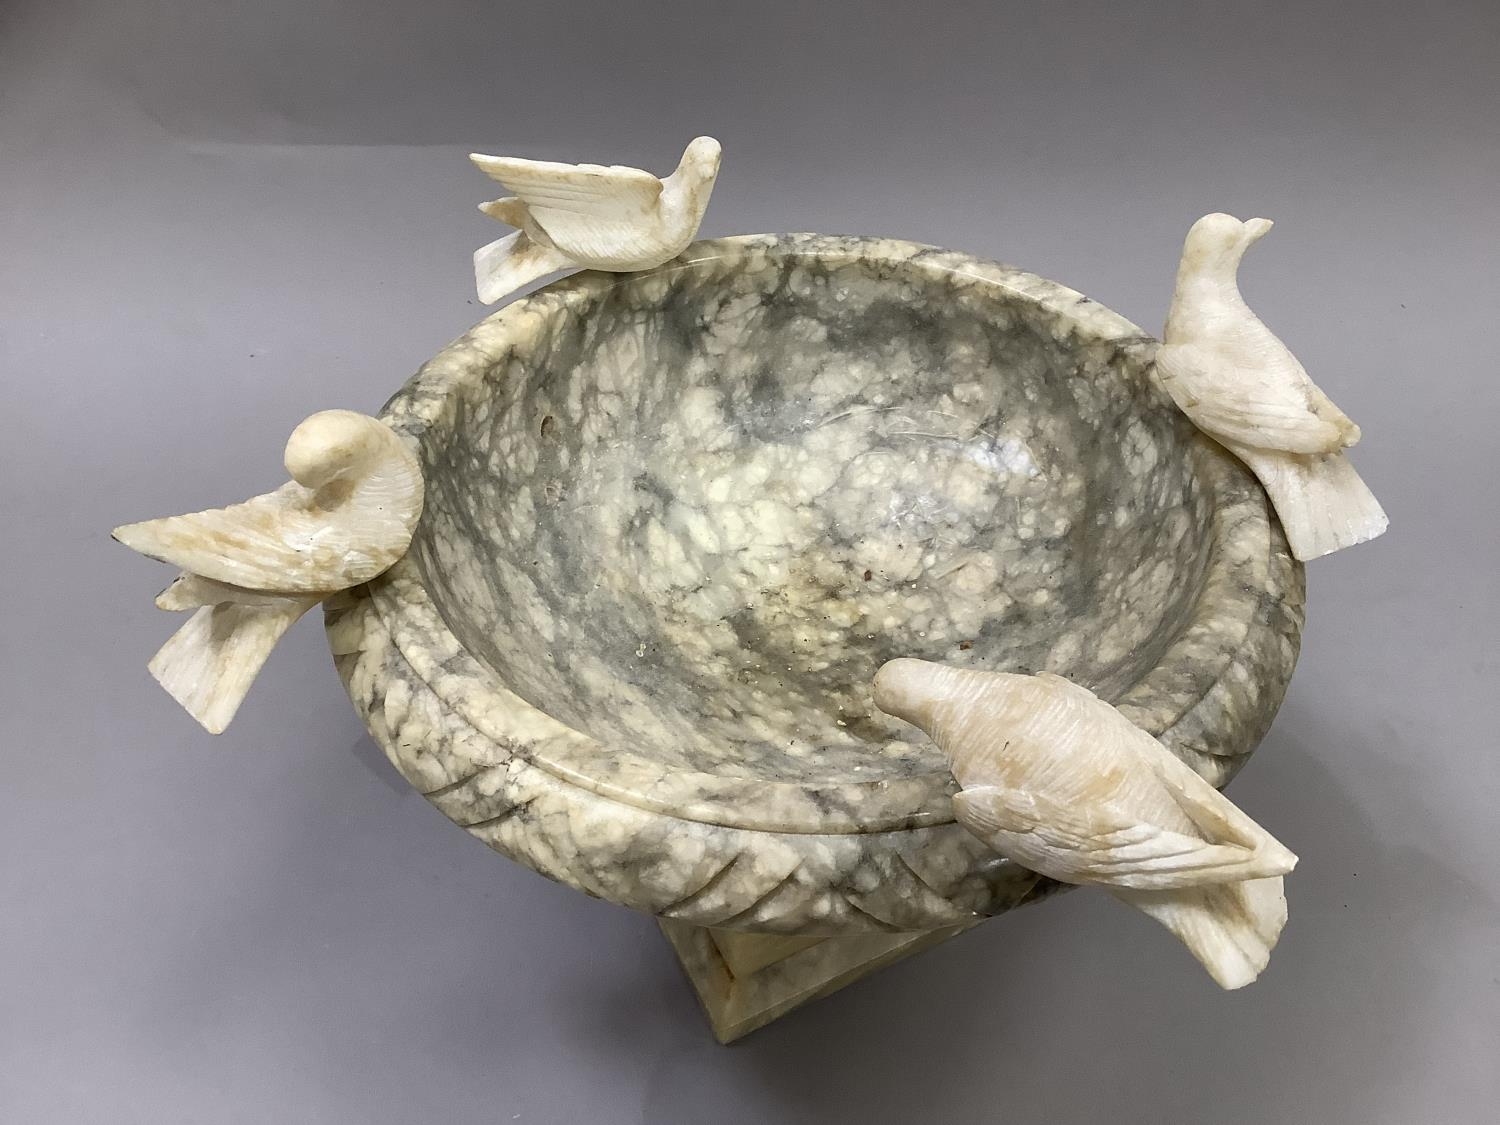 A pedestal bowl with Pliny doves perched on the rim, alabaster, approximately 31cm diameter by - Image 2 of 2